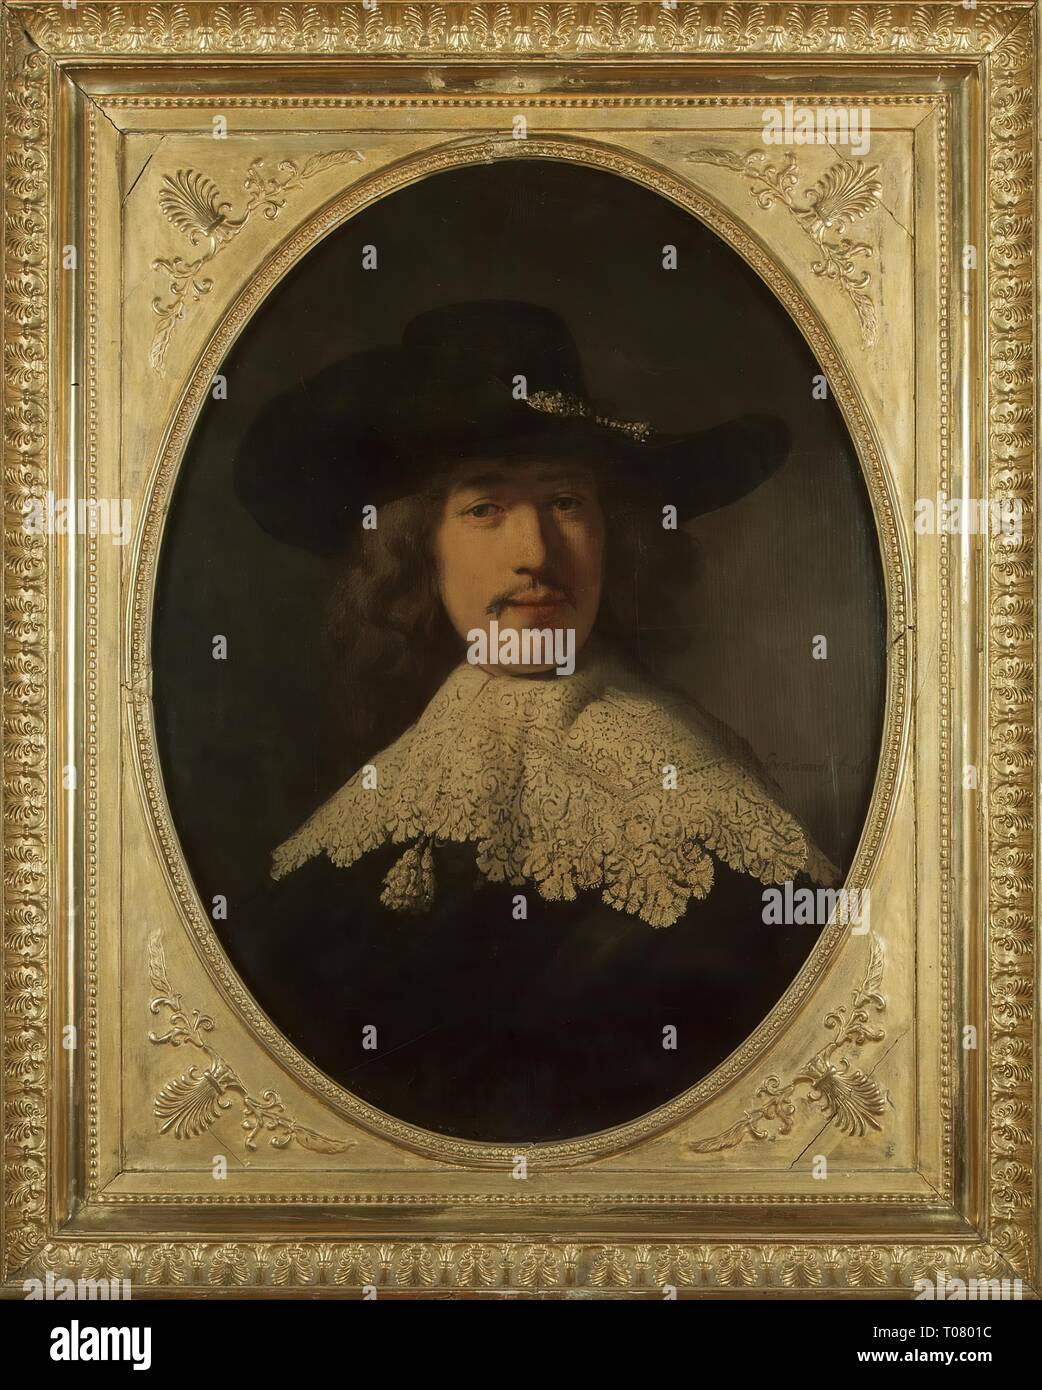 'Portrait of a Young Man with a Lace Collar'. Holland, 1634. Dimensions: 70,5x52 cm. Museum: State Hermitage, St. Petersburg. Author: Anonymous Artist, first half of the 17th century. Stock Photo